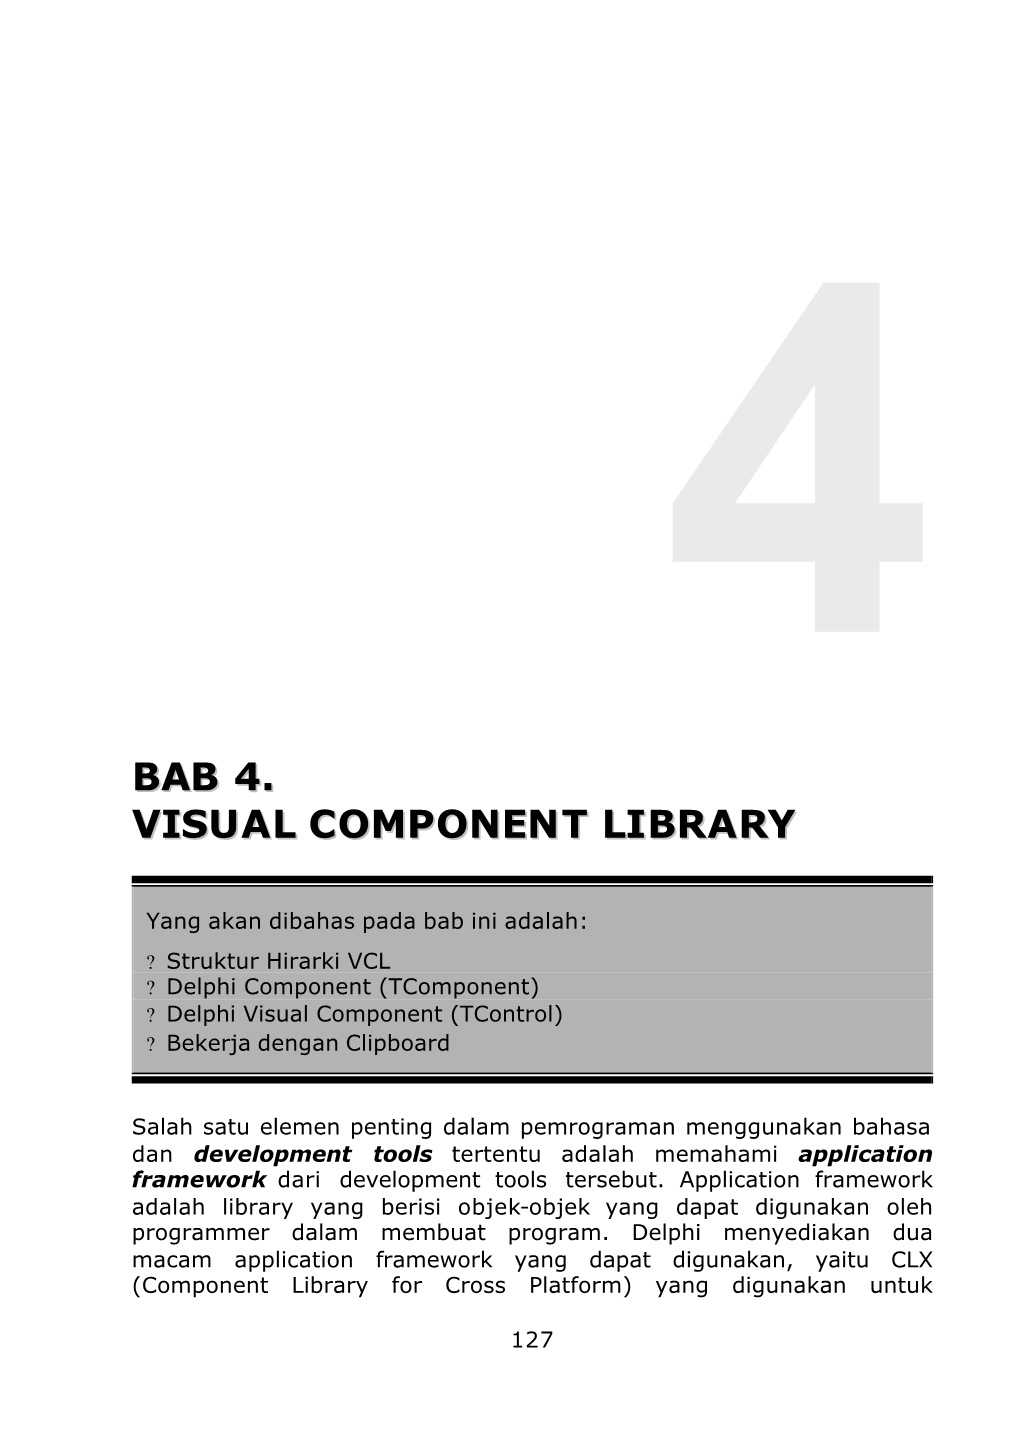 Bab 4. Visual Component Library